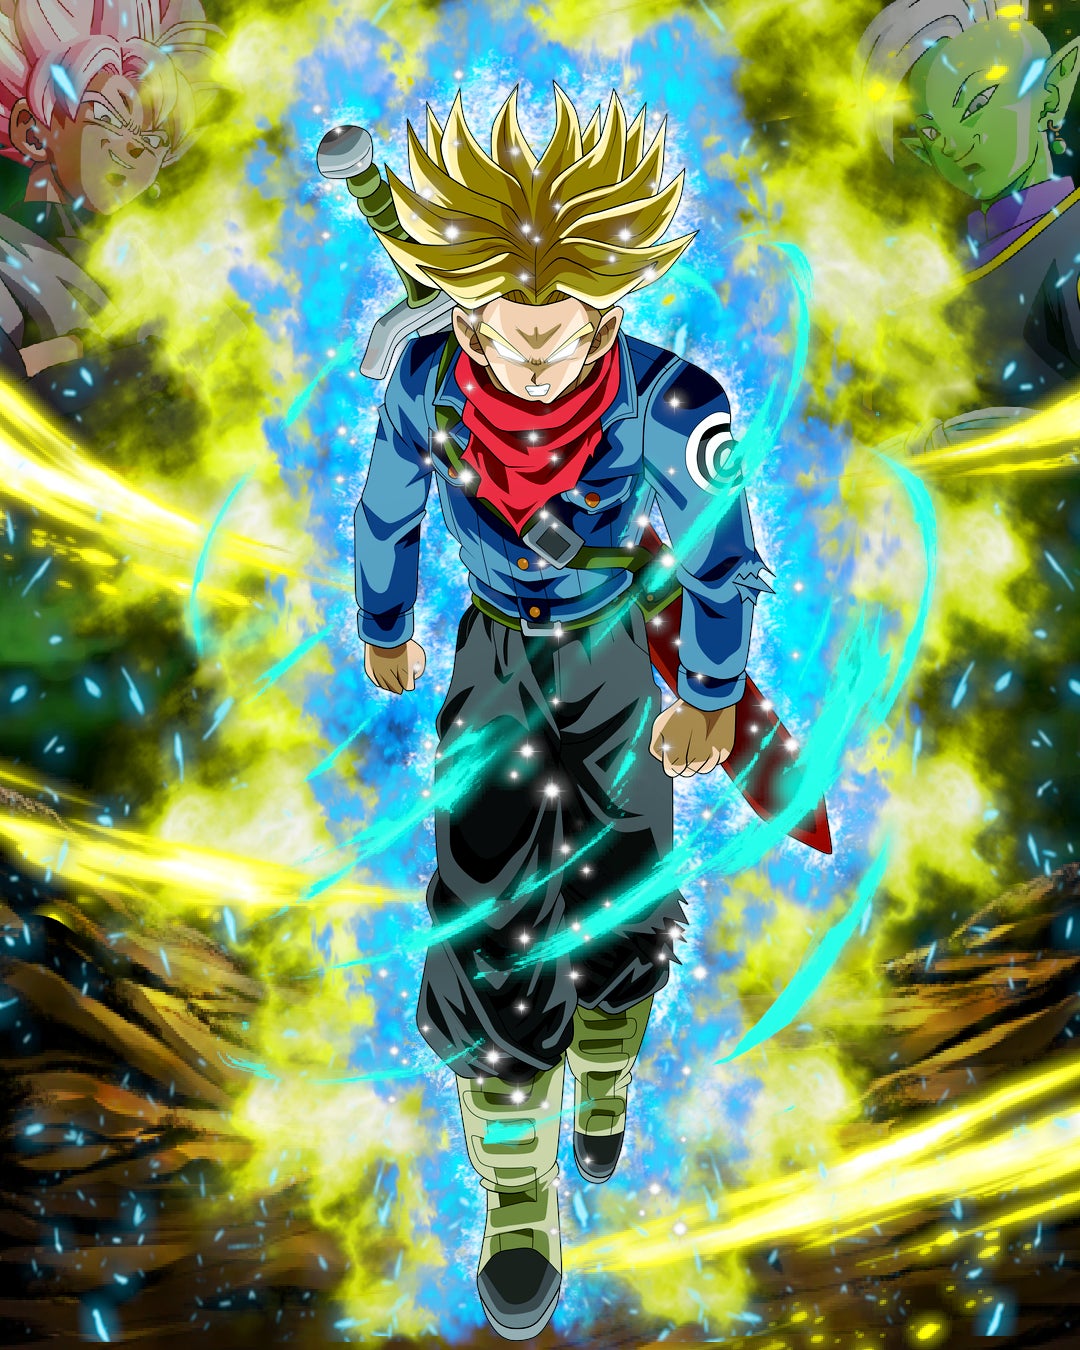 Trunks ssj rage fan concept. Can new version of trunks rage look like this? I hope it